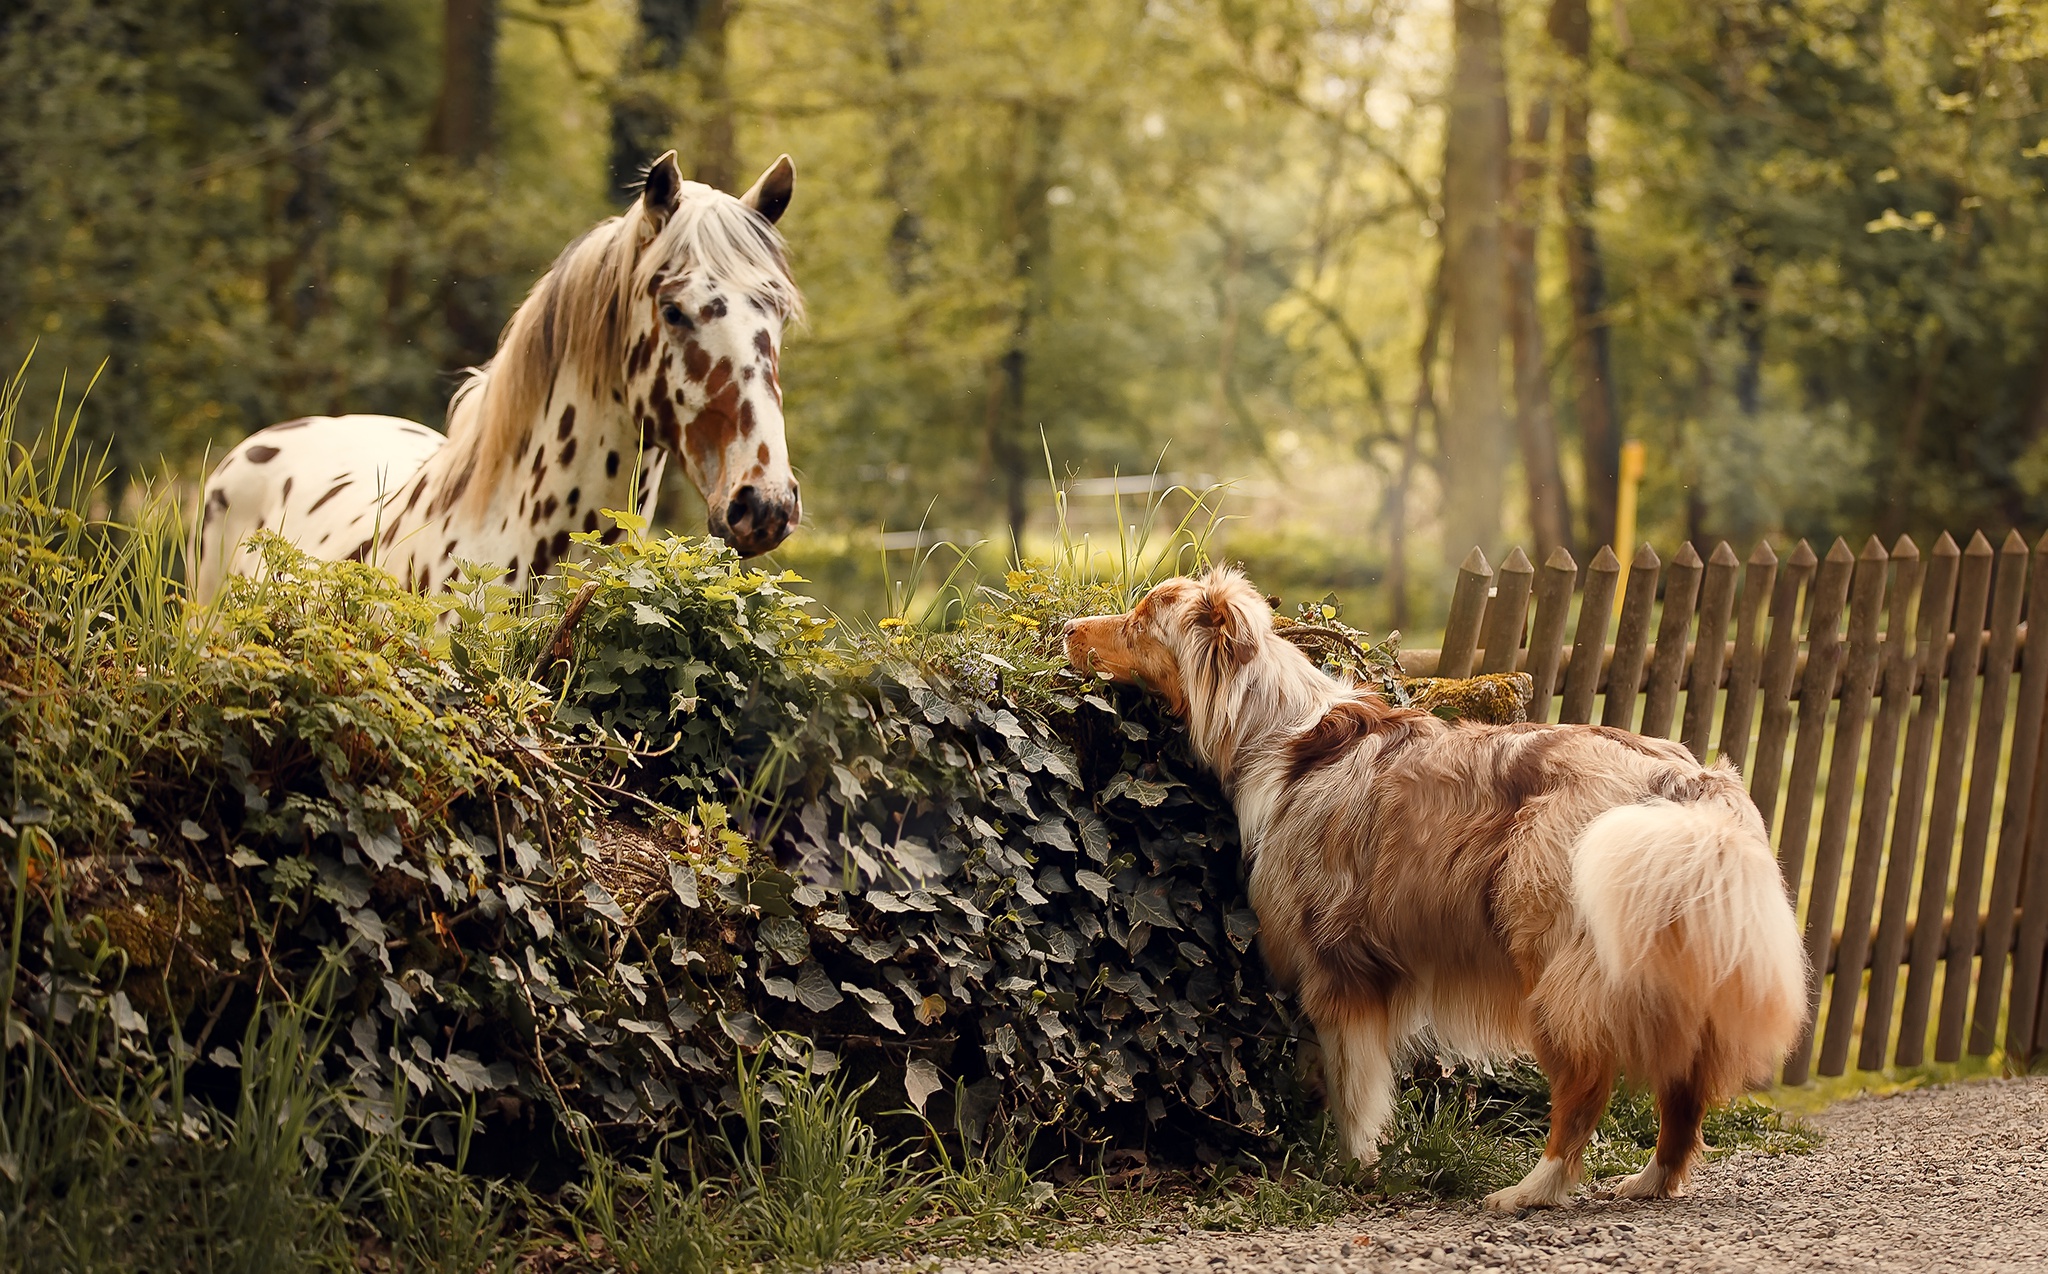 Horse And Dog Pictures Wallpapers